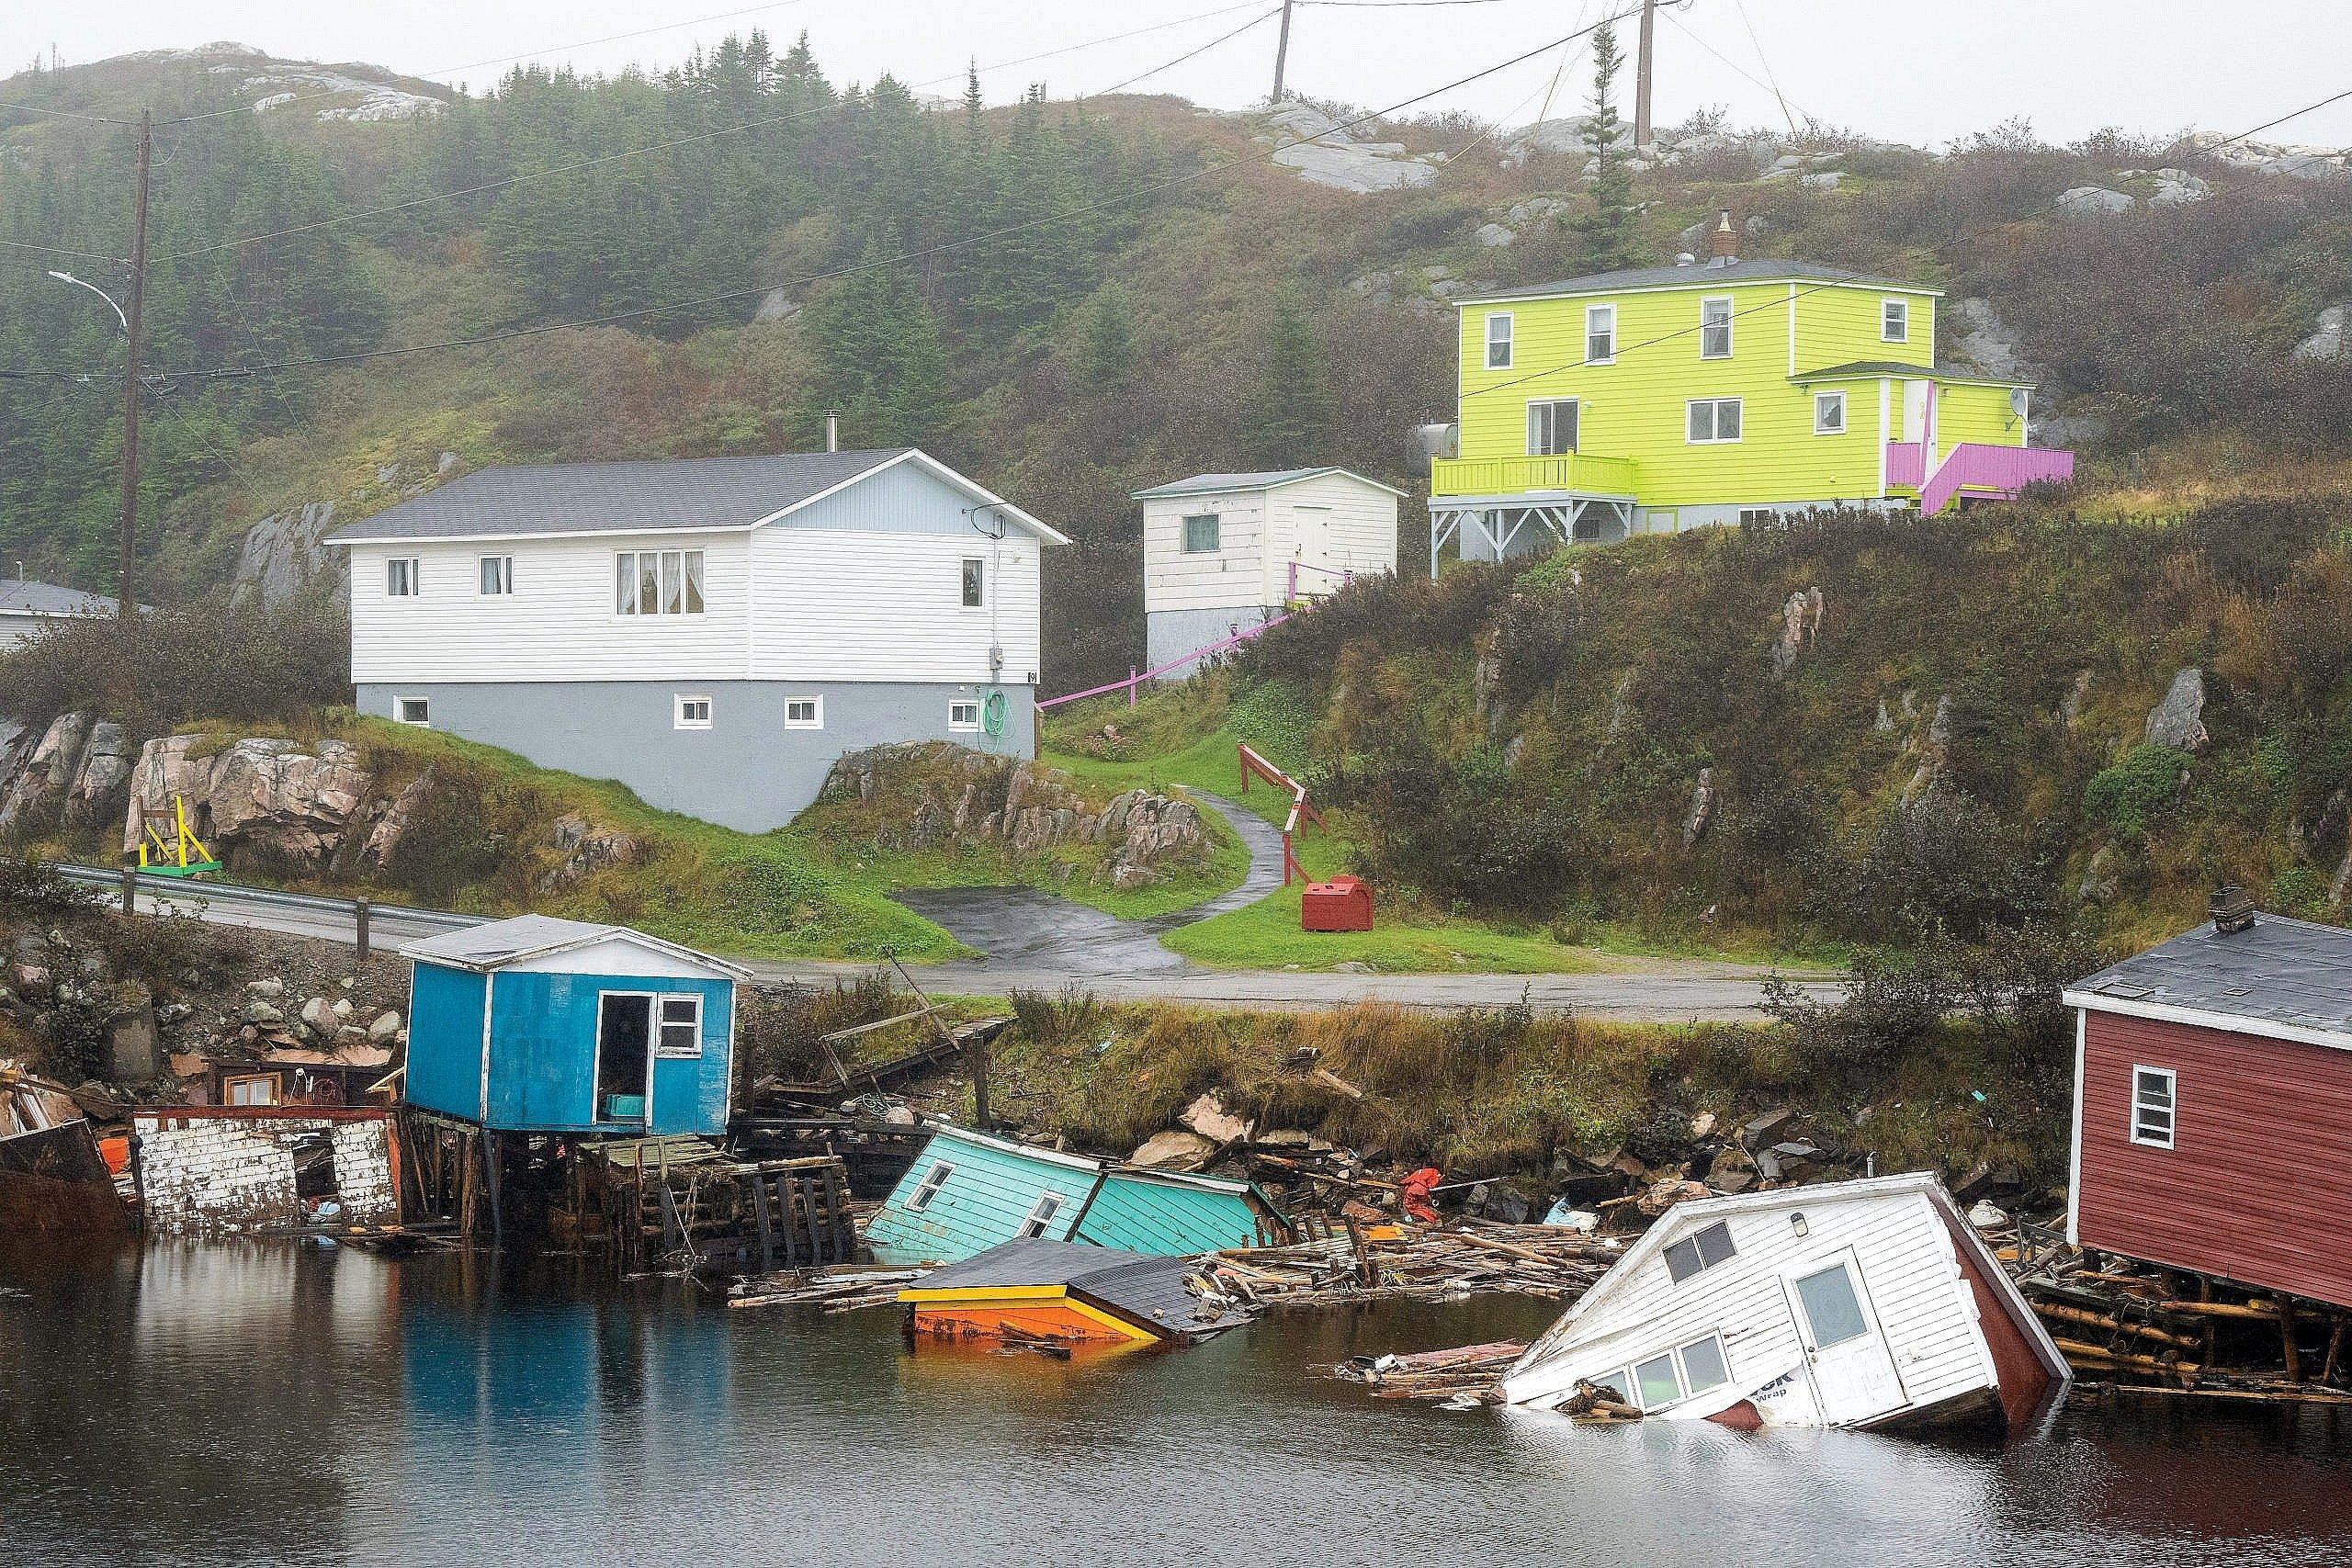 Newfoundland: Hurricane Fiona caused more than $800 million worth of damage in 2022. In 2060, a hotter North Atlantic will fuel stronger and more frequent hurricanes.